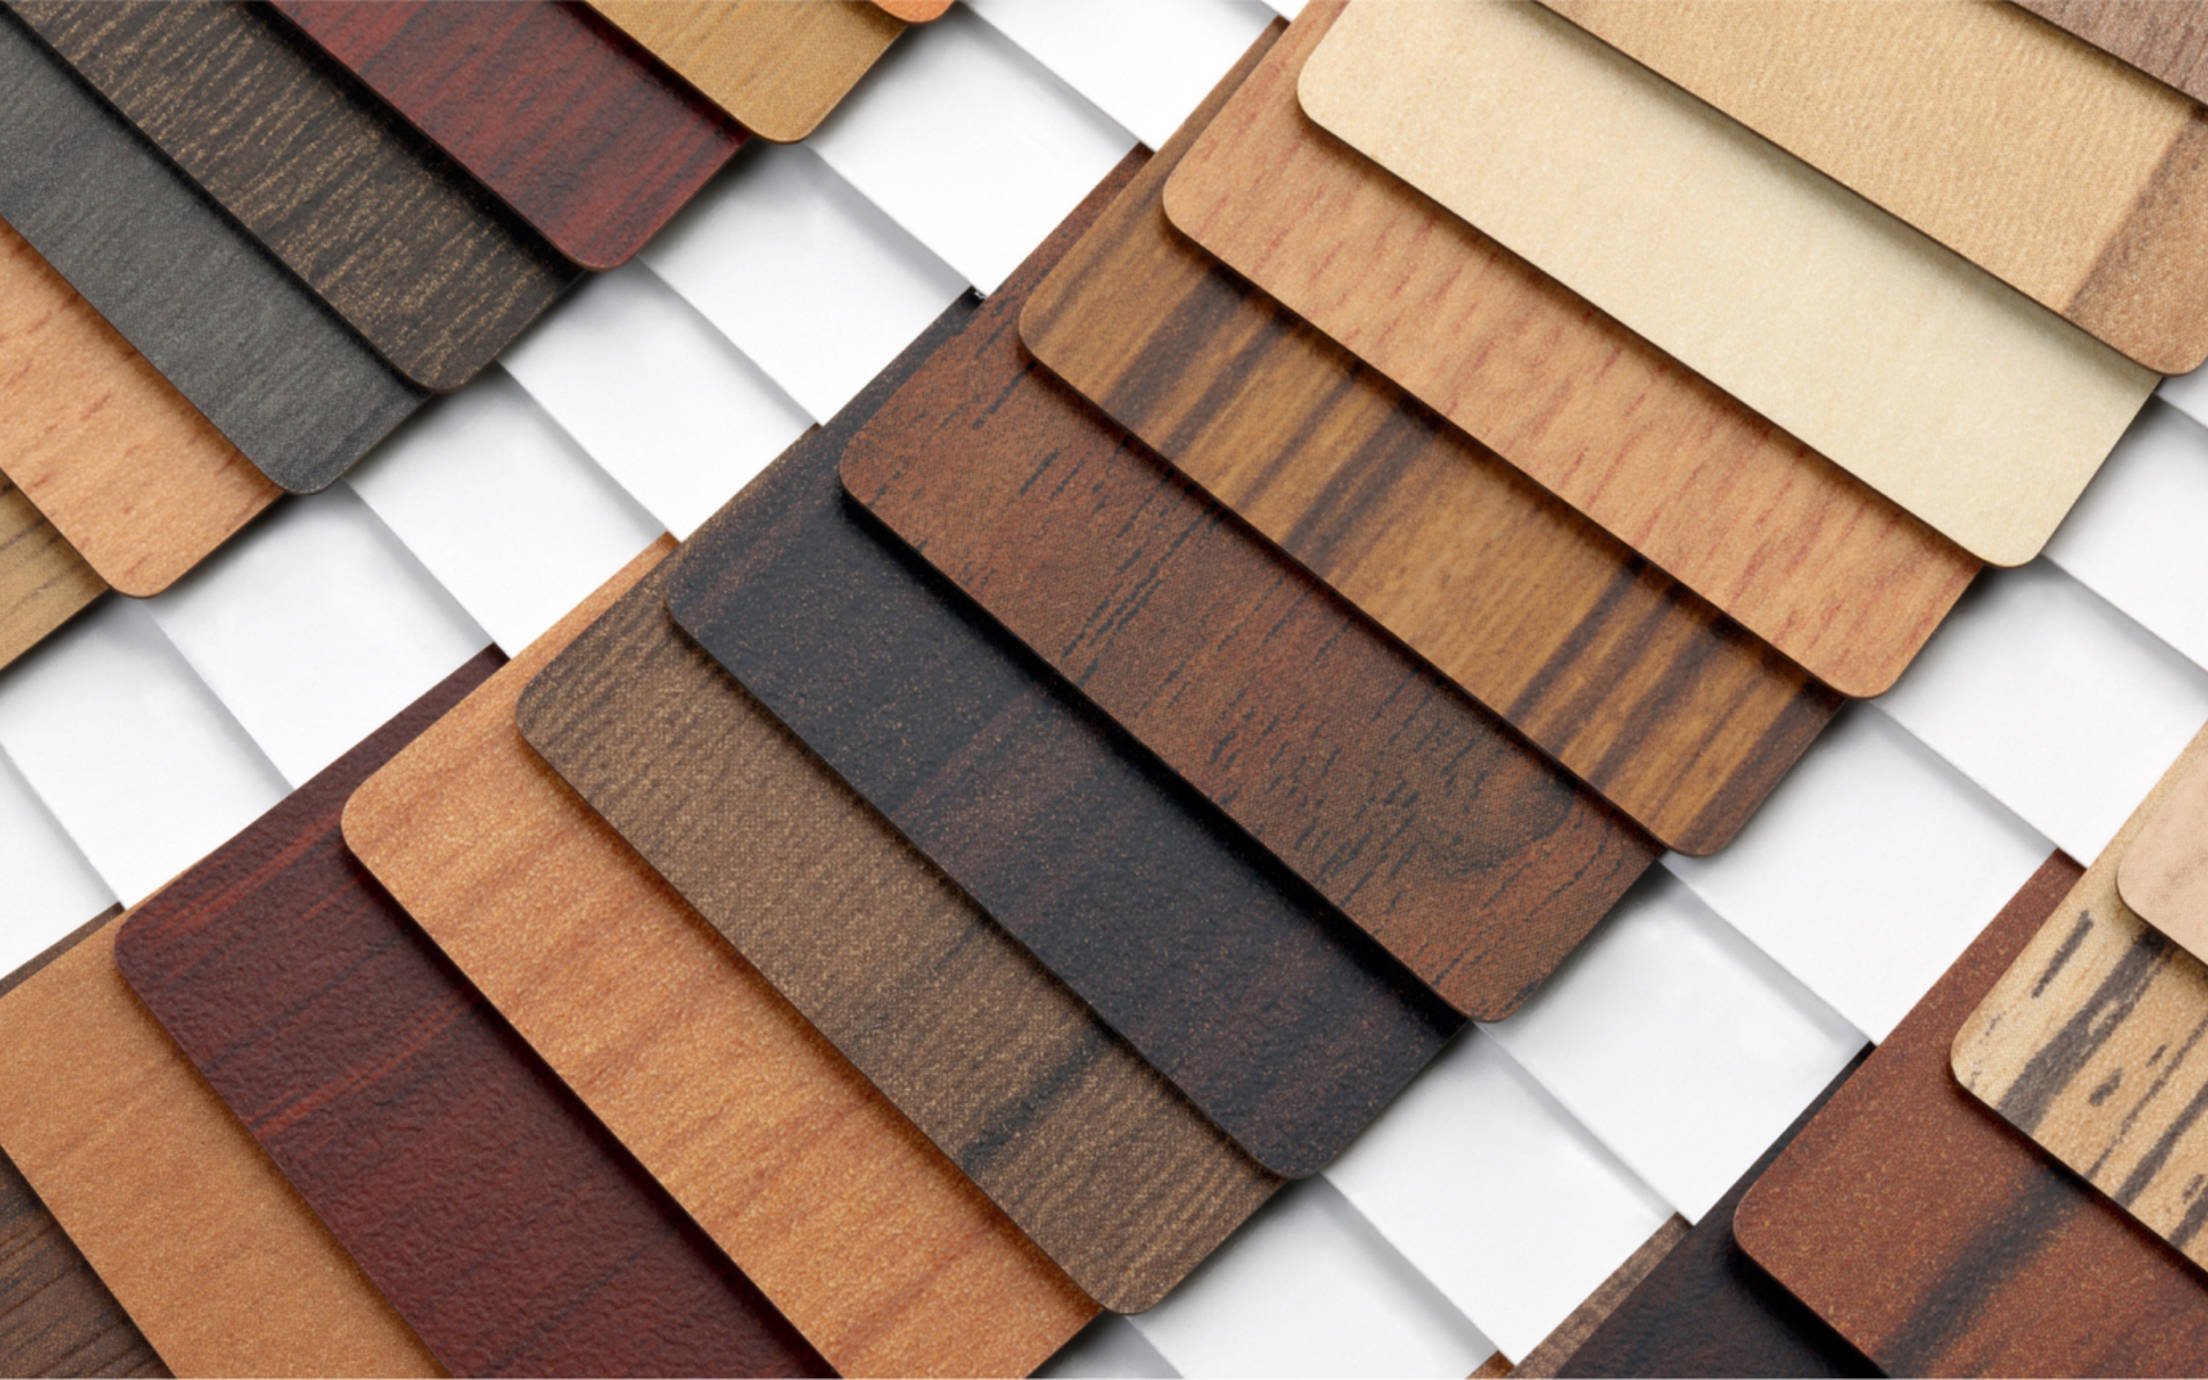 Colour samples of wood effect coating